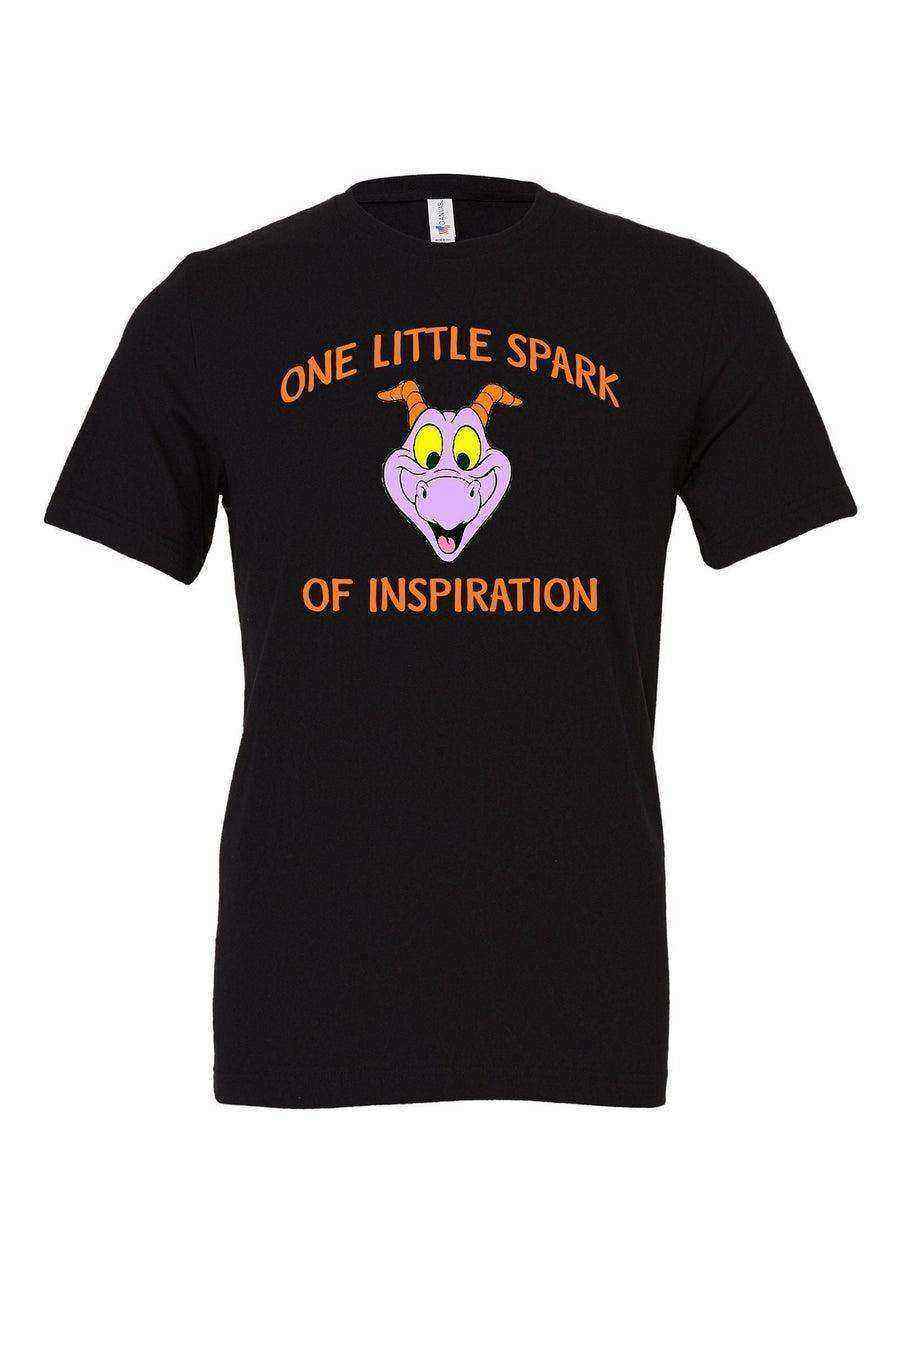 Toddler | Figment One Little Spark Tee | Imagination - Dylan's Tees